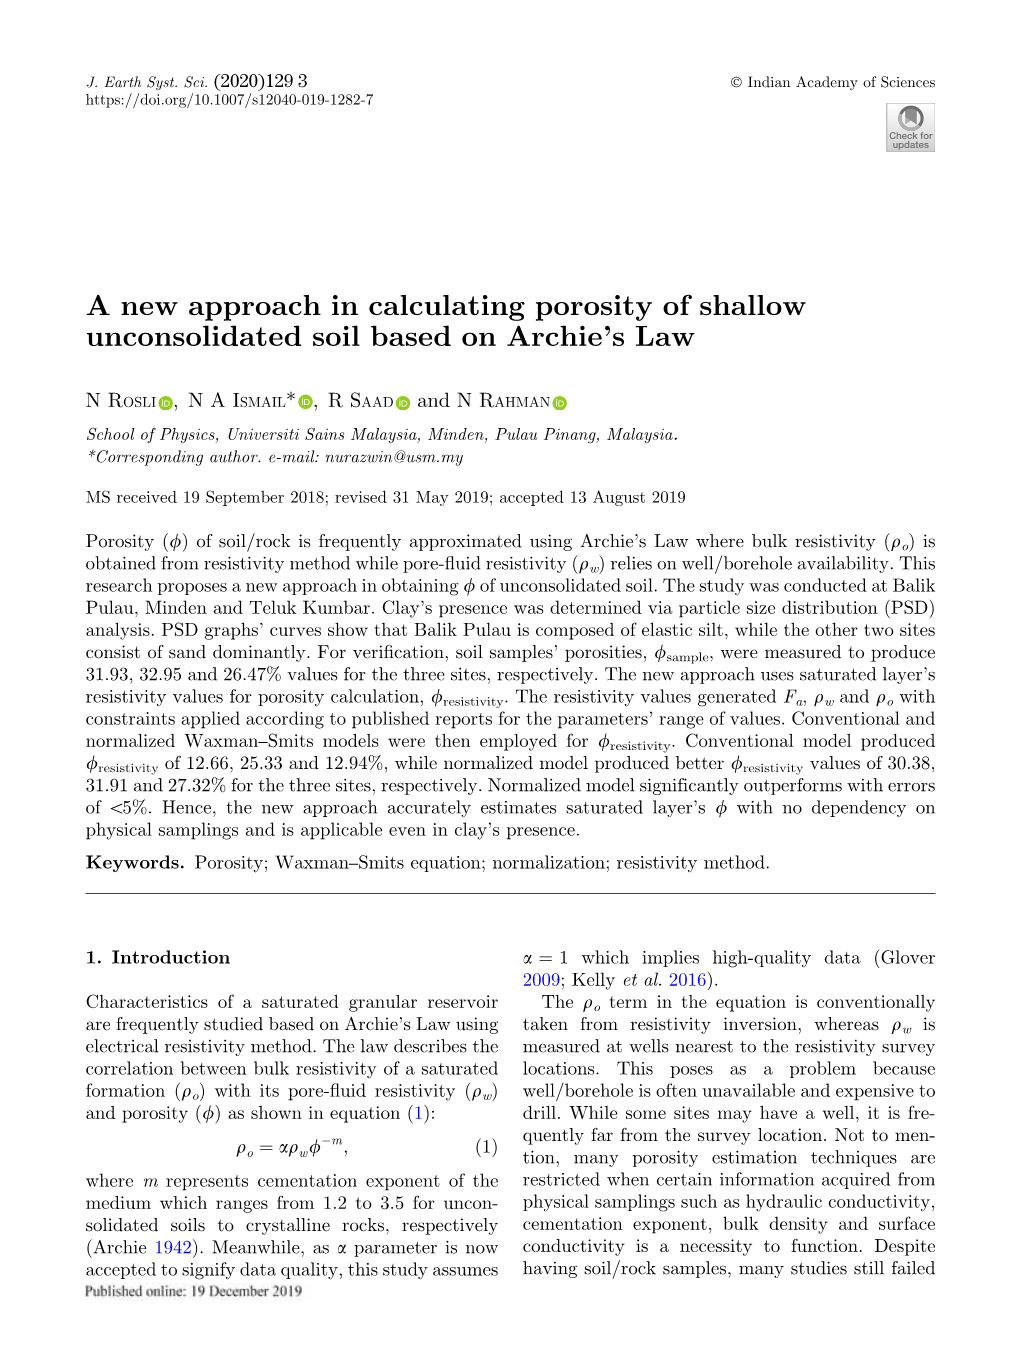 A New Approach in Calculating Porosity of Shallow Unconsolidated Soil Based on Archie’S Law